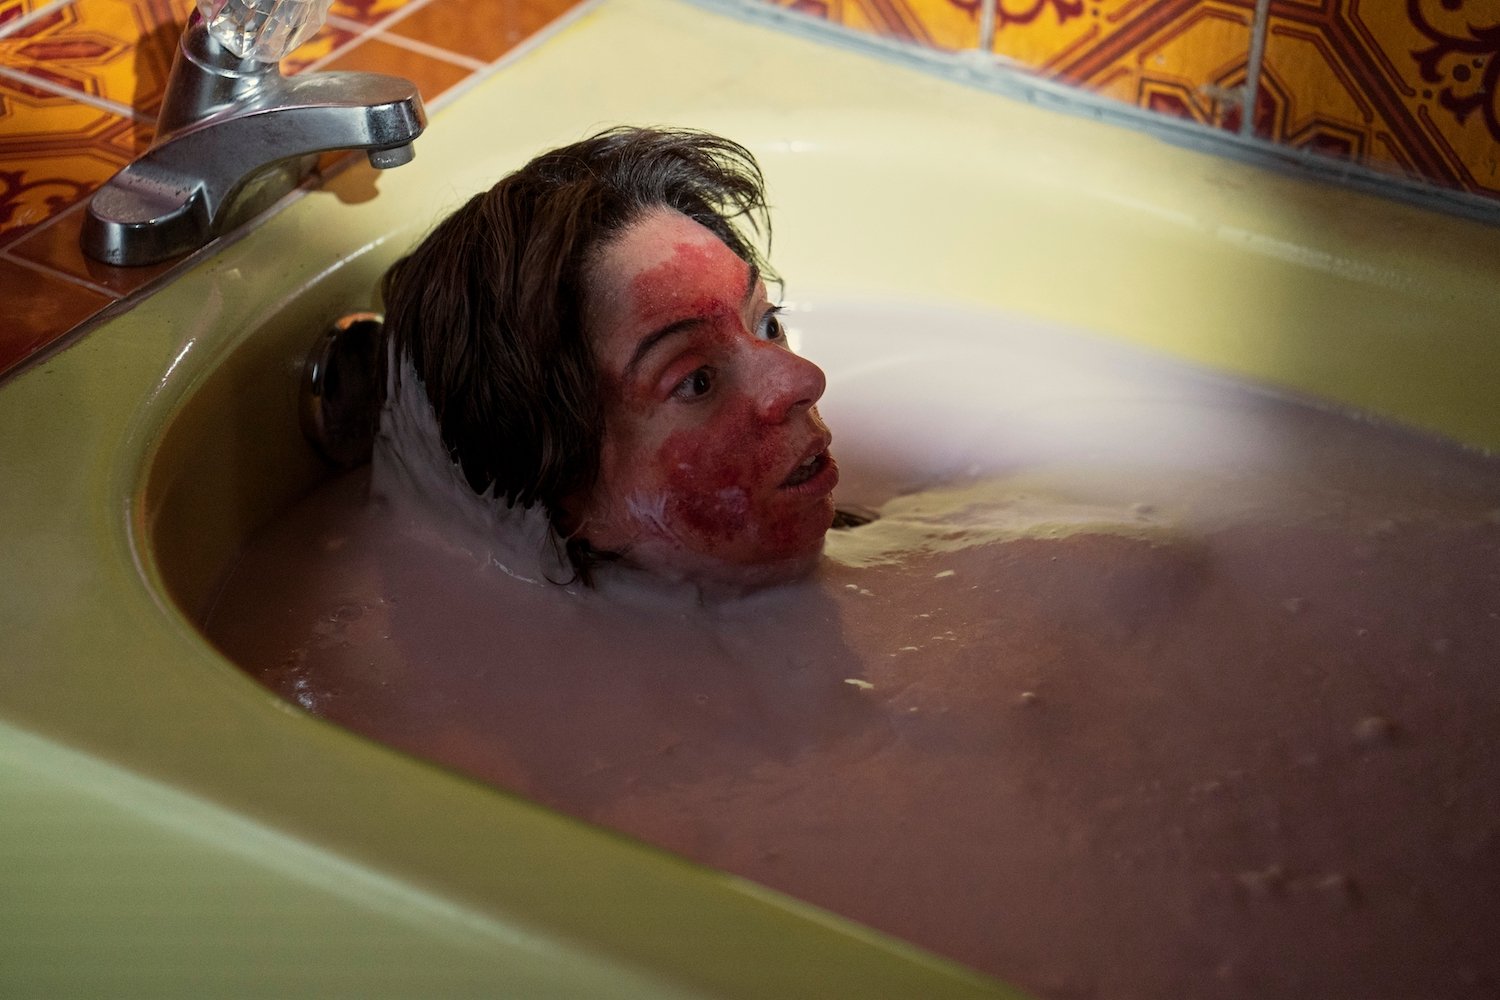 'Cabinet of Curiosities' stars Kate Micucci, seen here in a bath tub filled with a gelatinous substance.